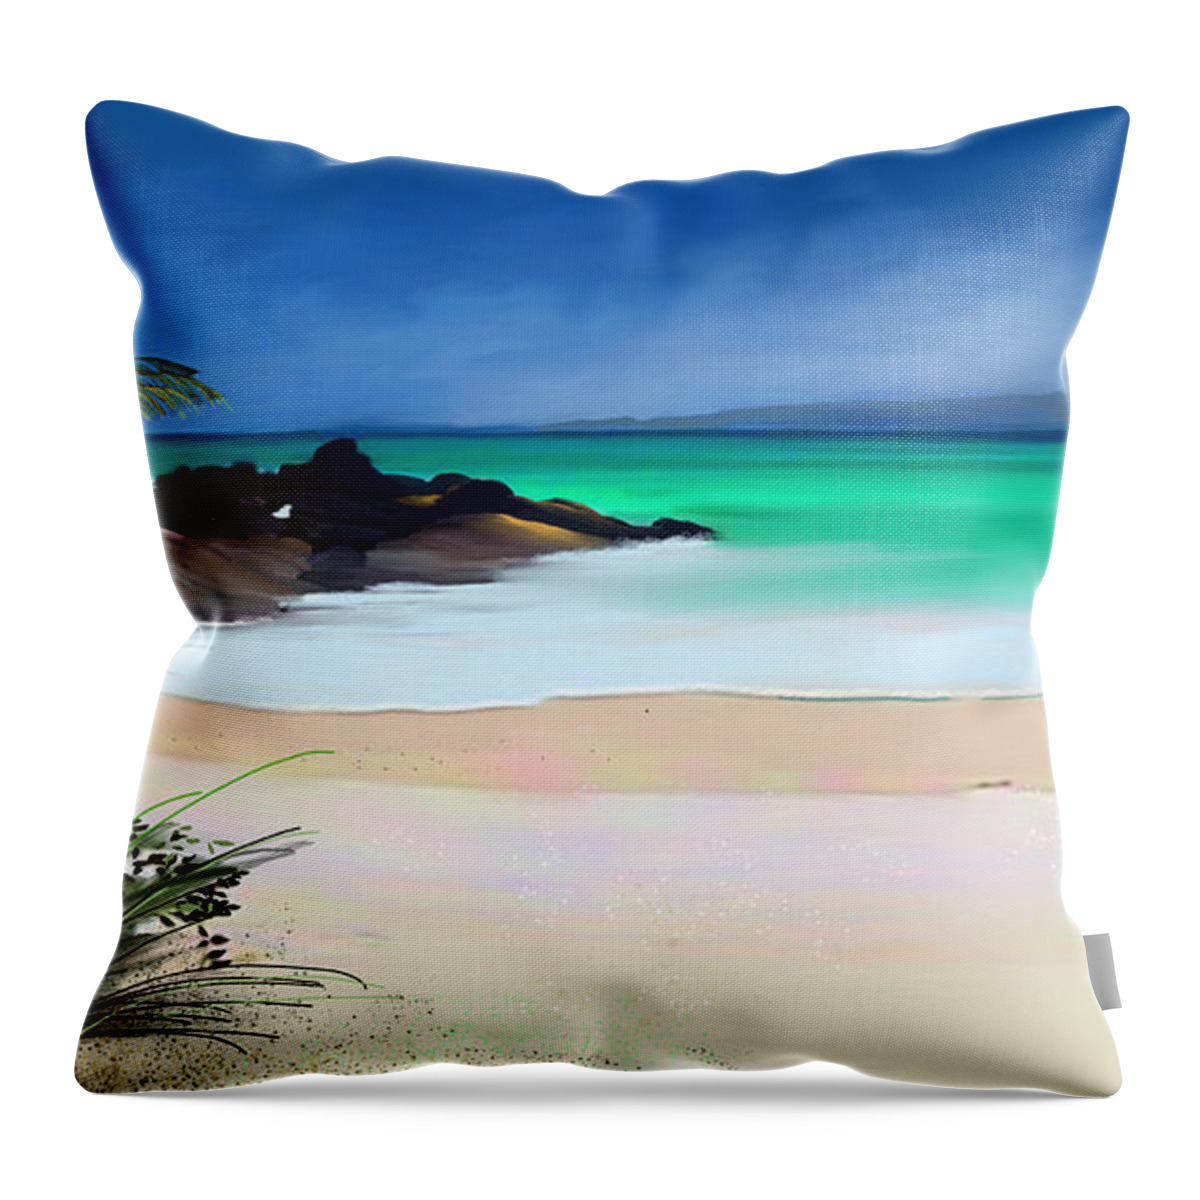 Decorative Art Throw Pillow featuring the digital art Tropical charm by Anthony Fishburne